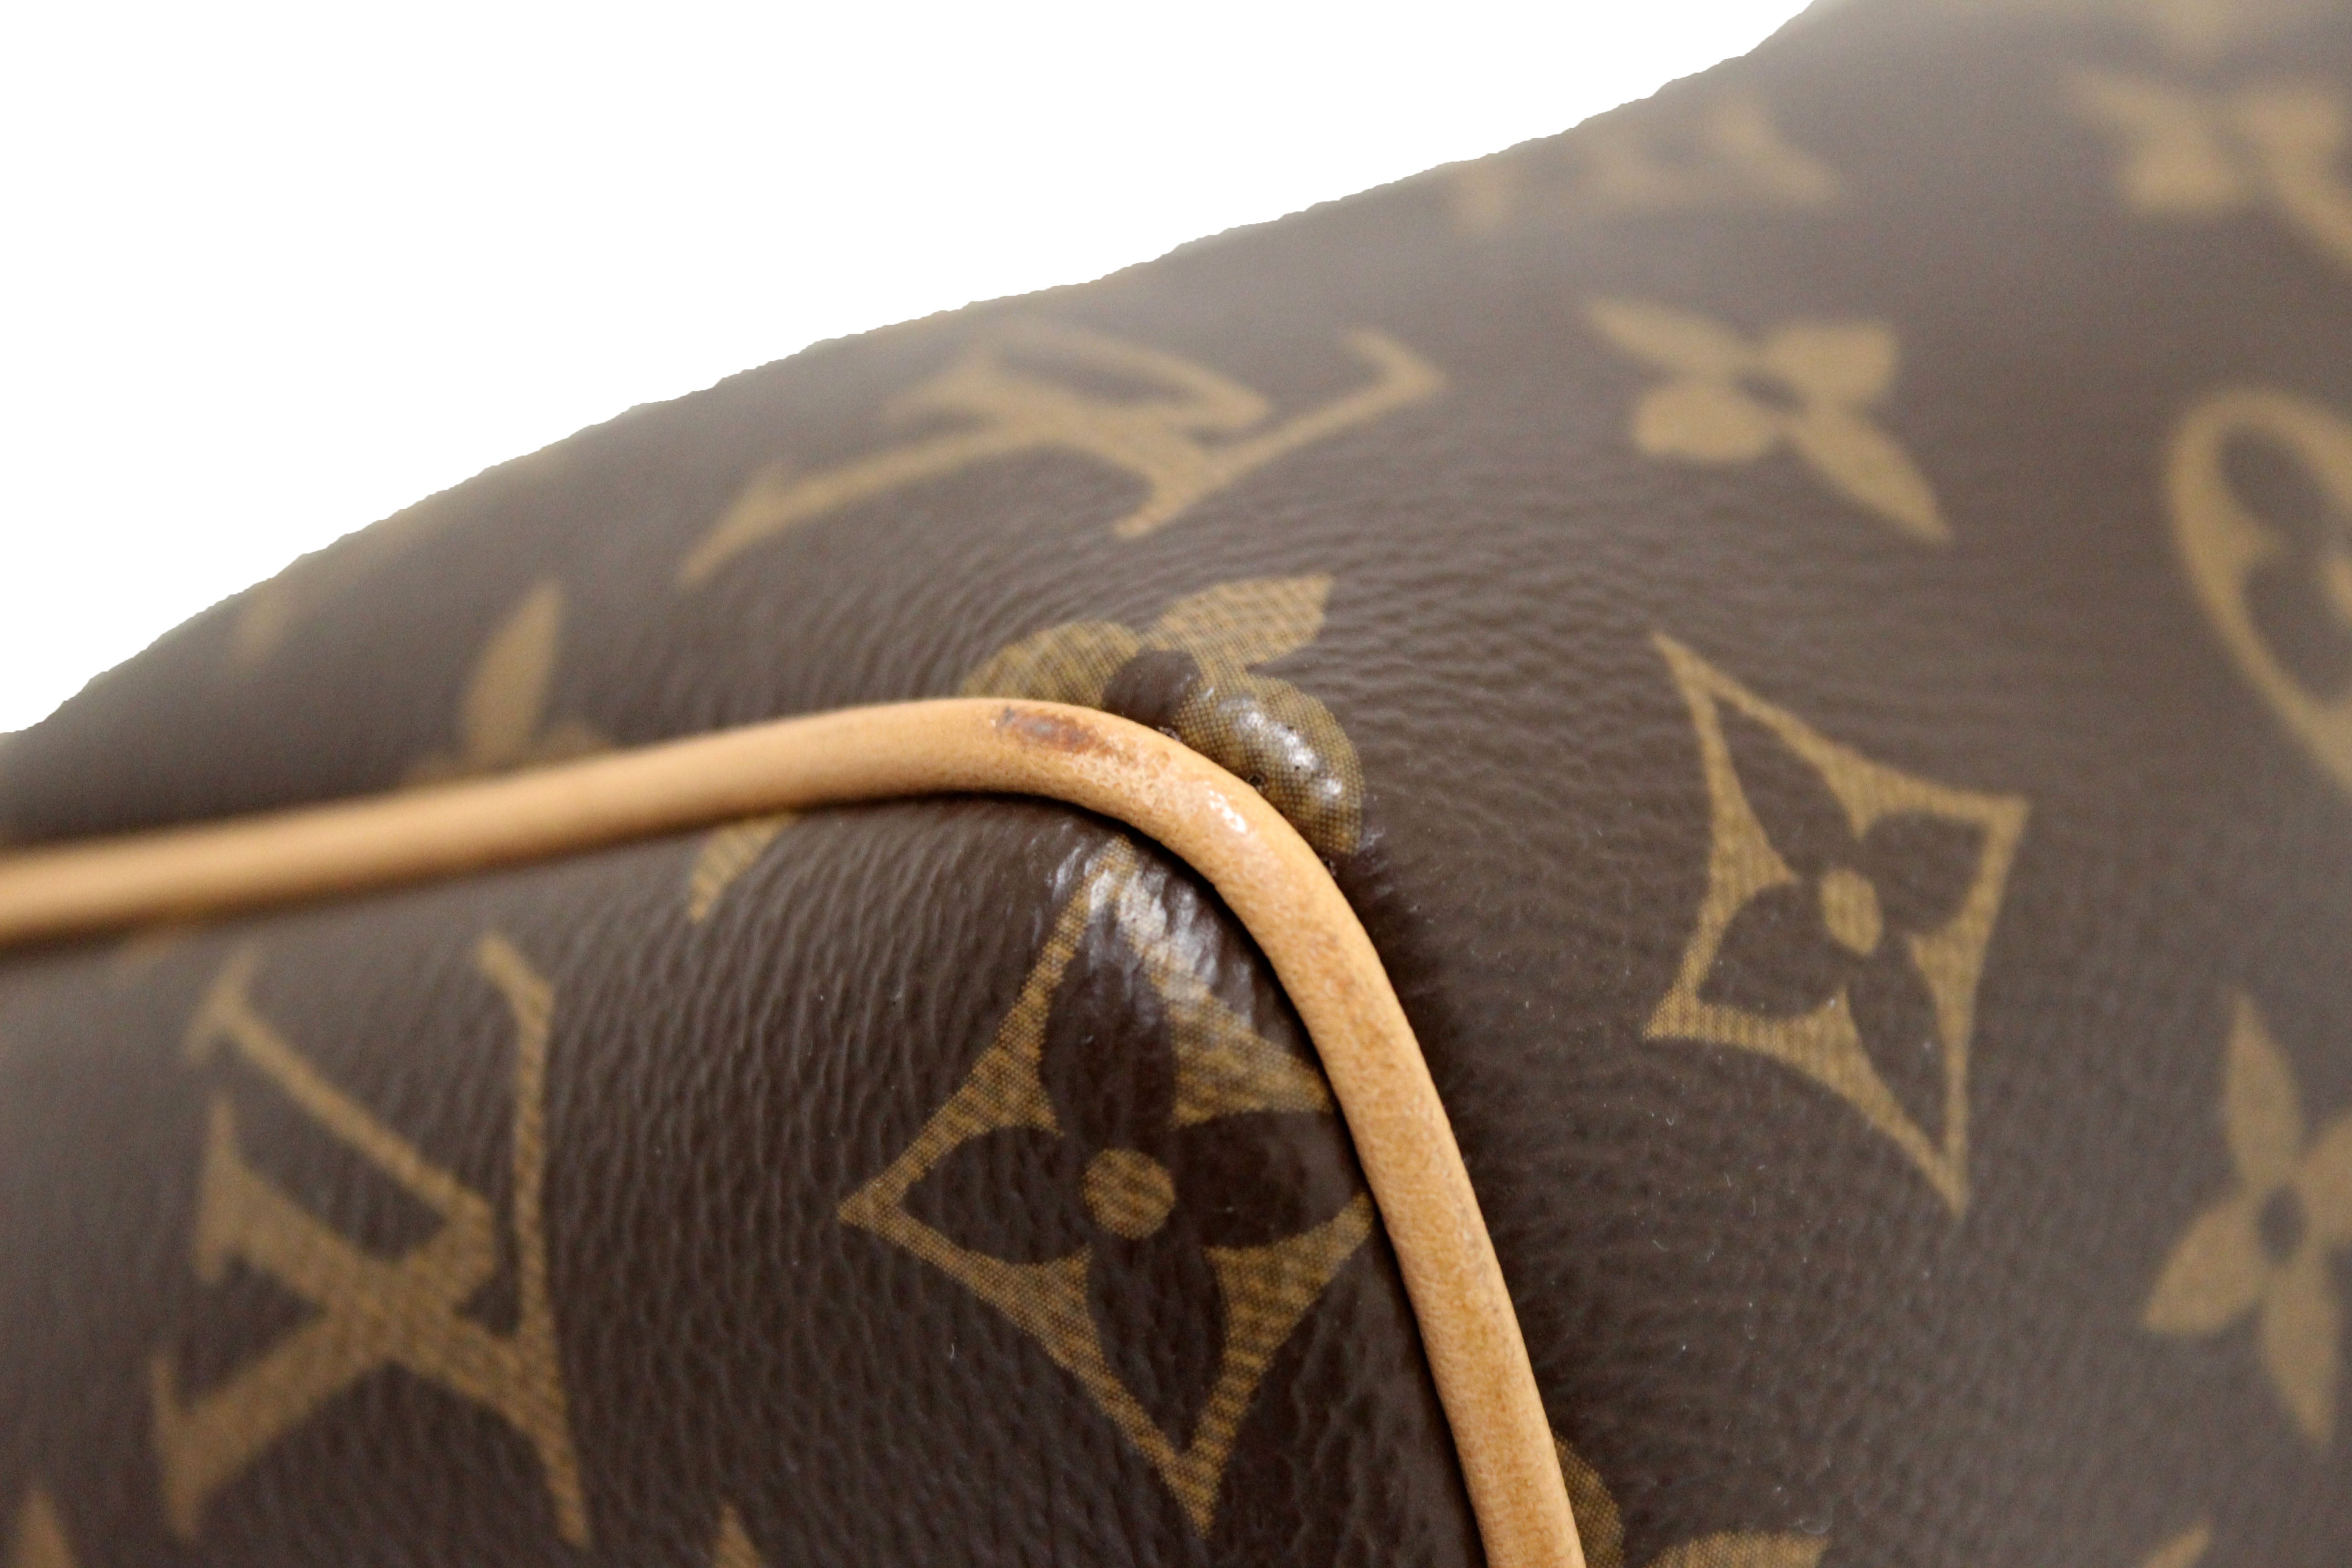 Louis Vuitton, Bags, Authentic Louis Vuitton Purse Gently Used